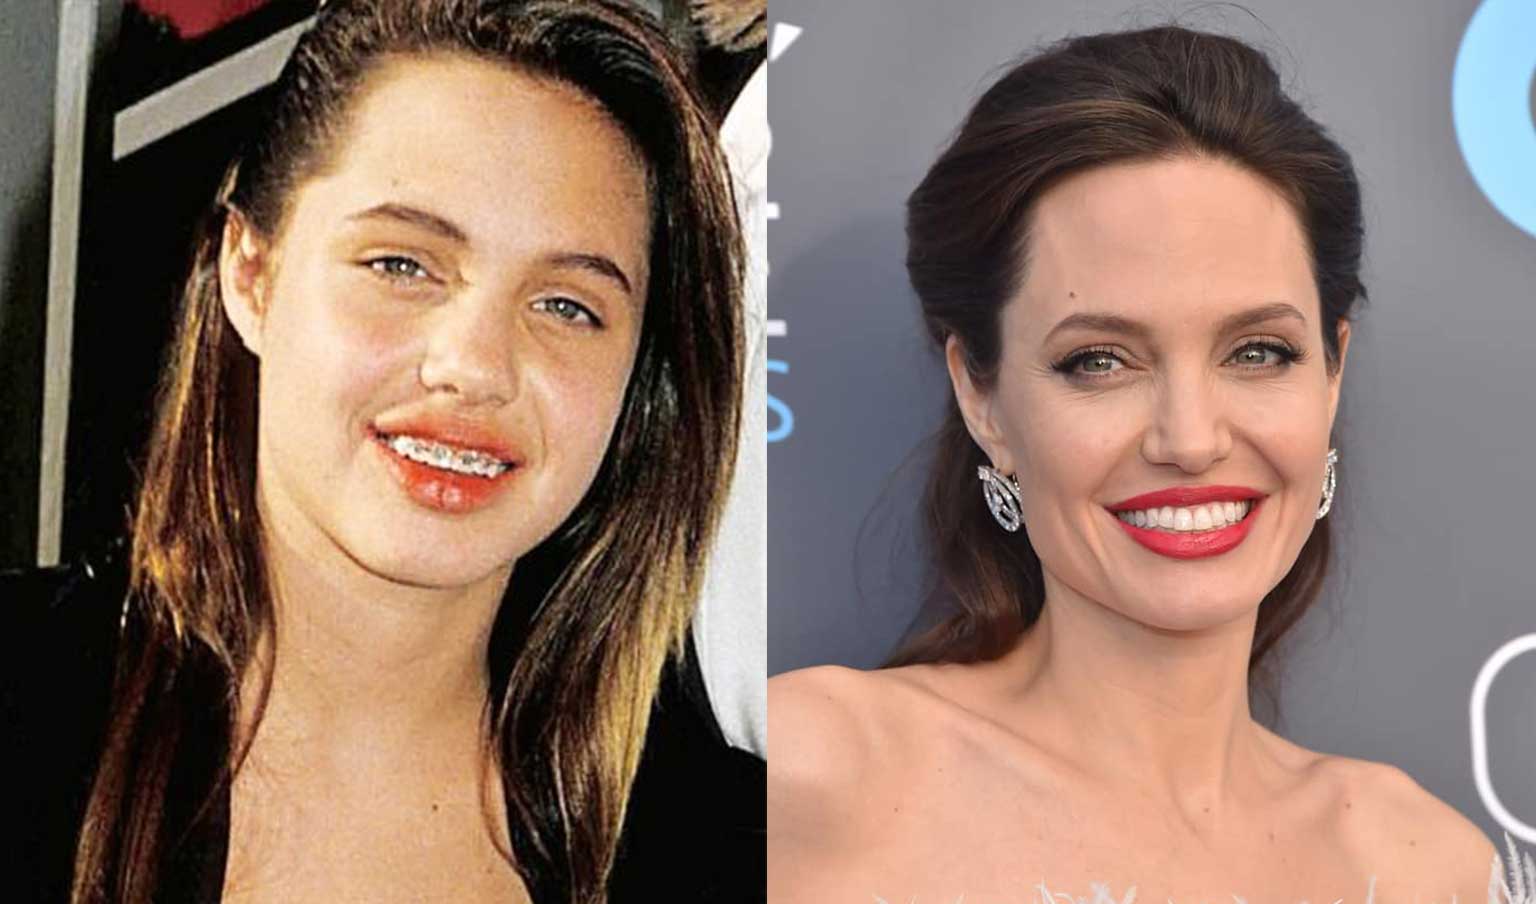 Celebrity Angelina Jolie before and after wearing metal braces